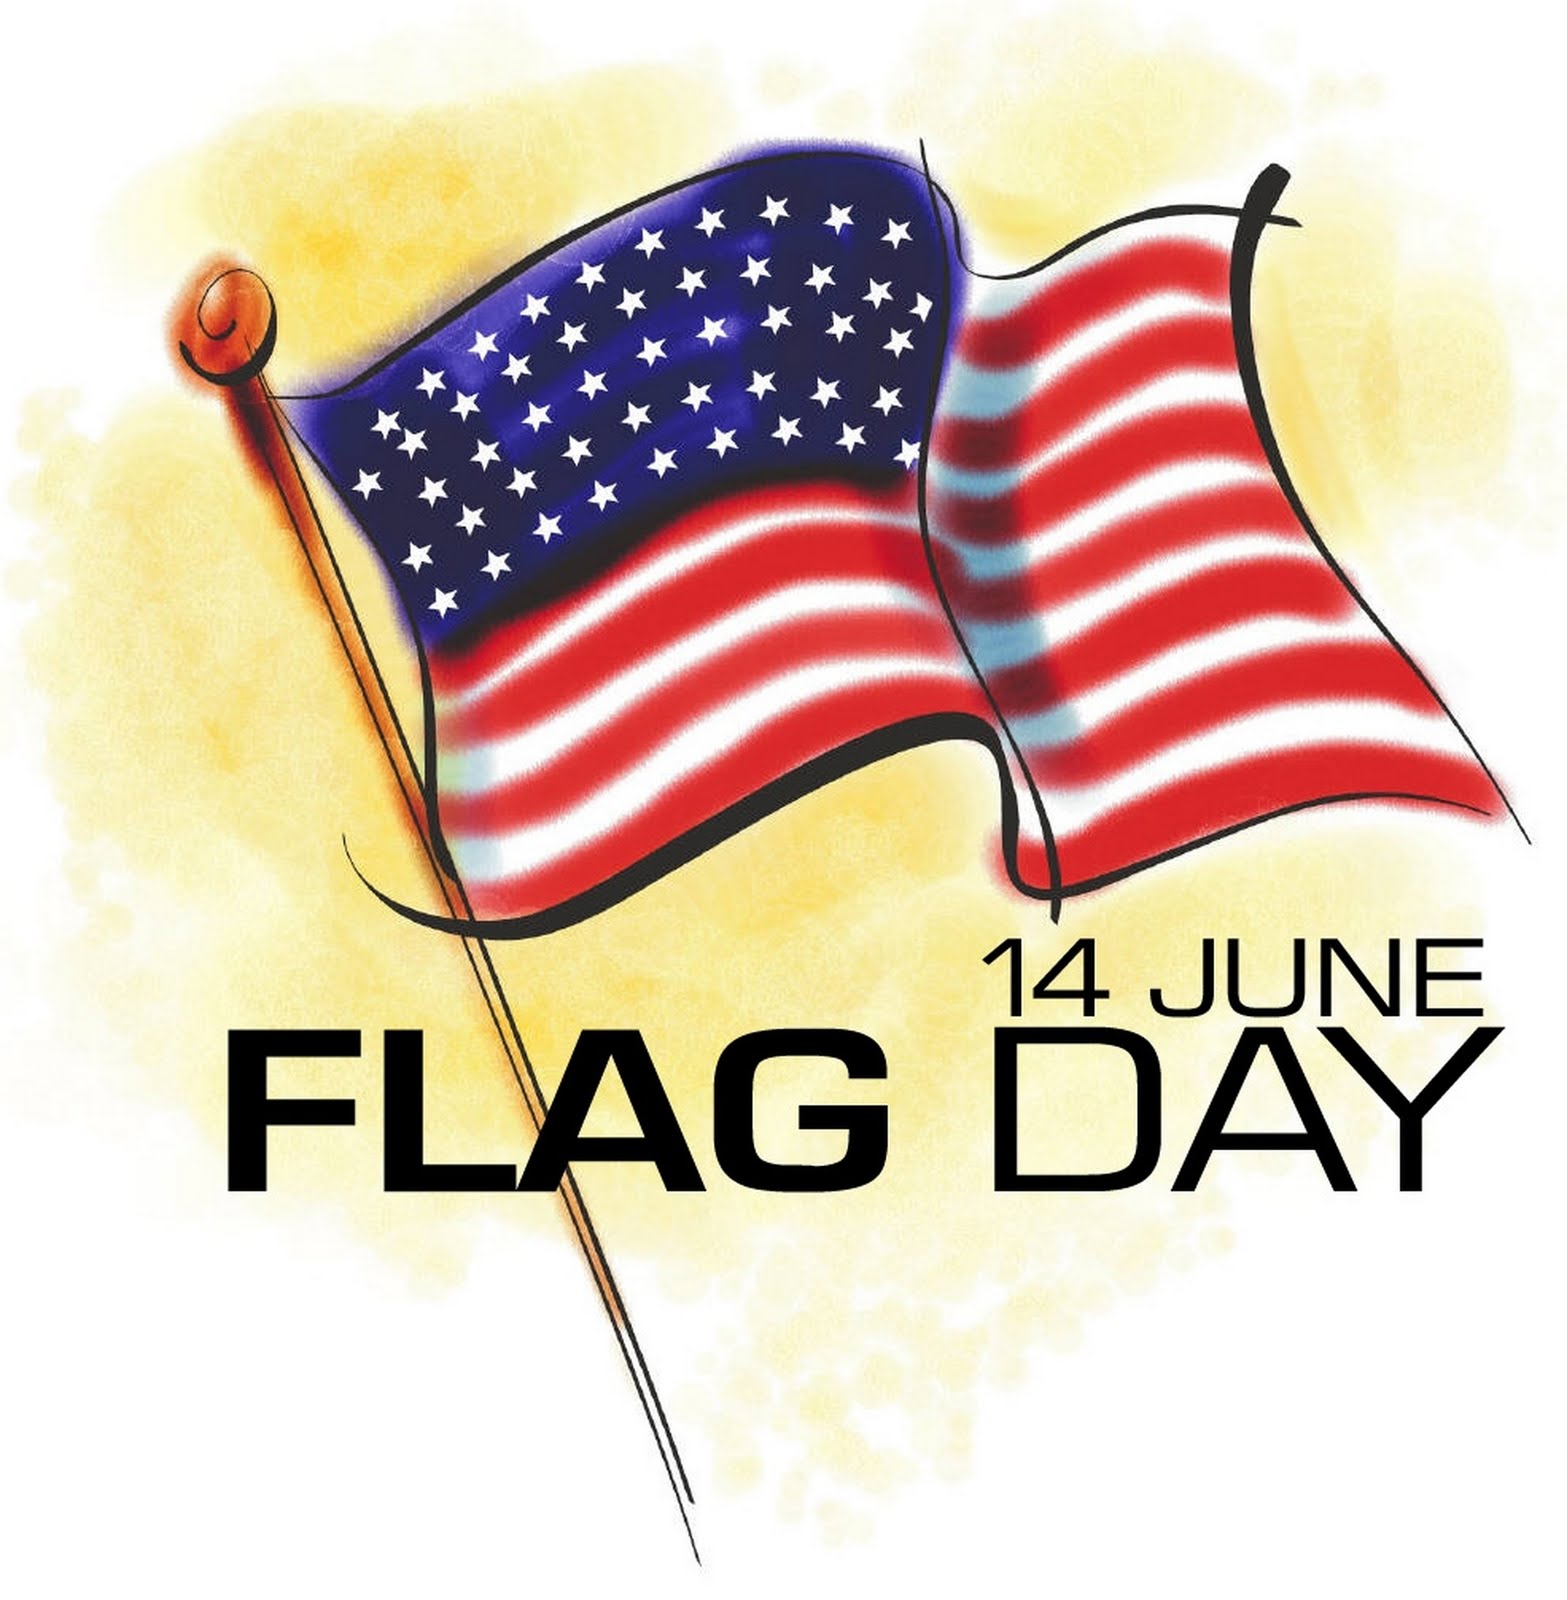 Flag Day June 14th